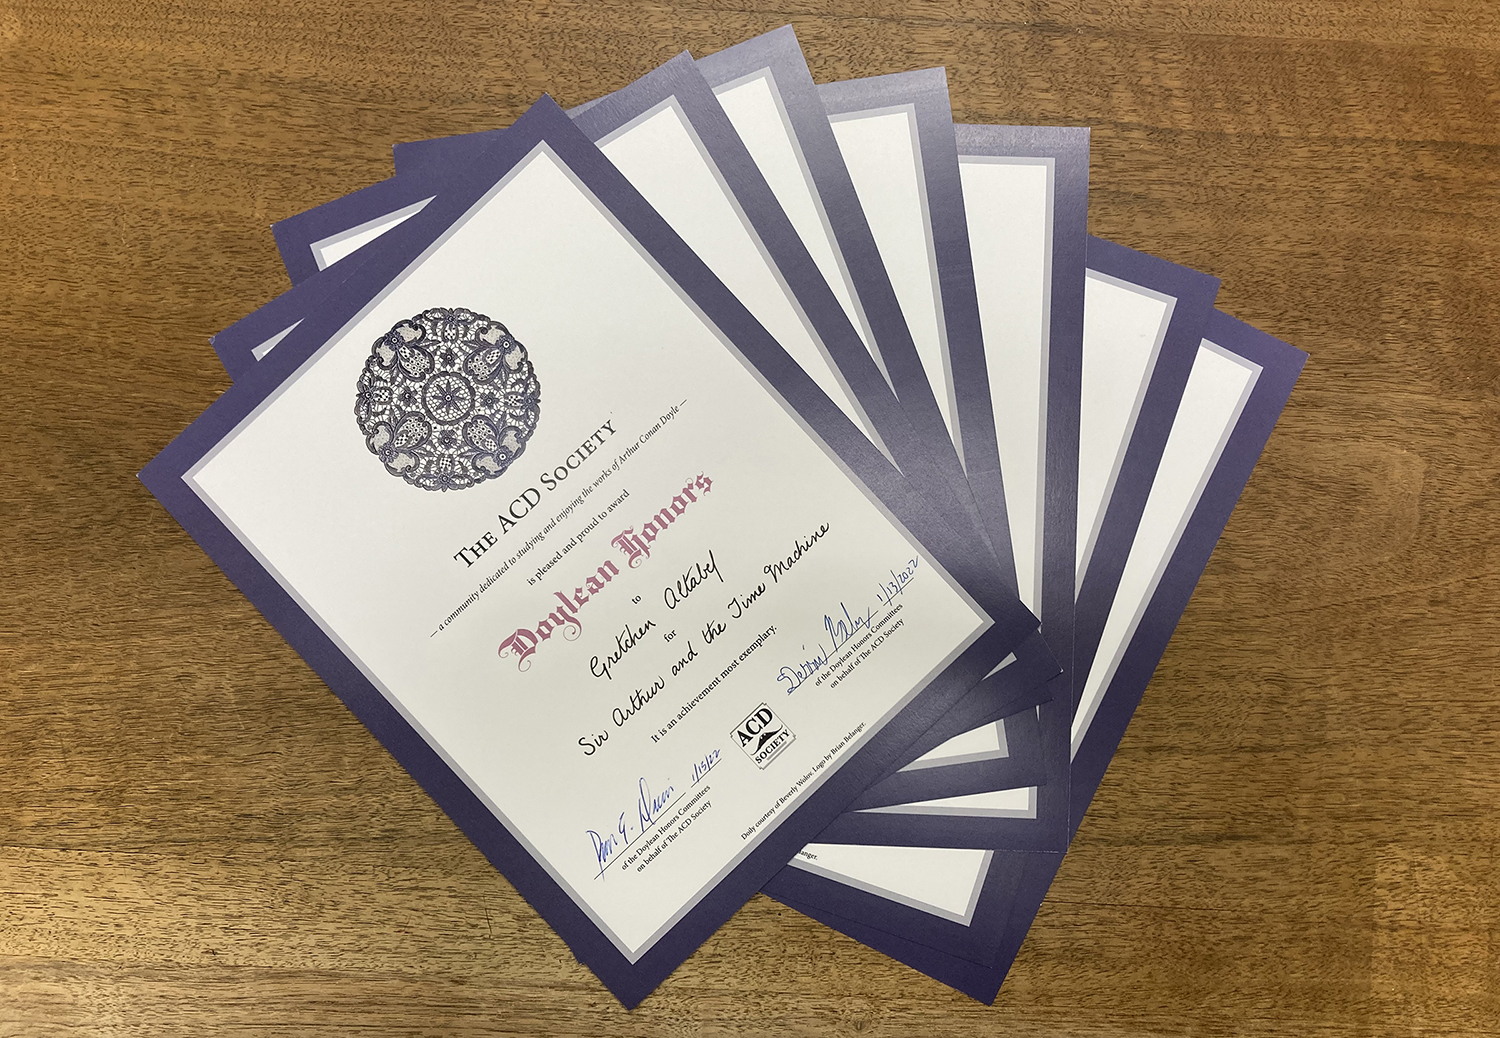 fanned array of Doylean Honors certificates